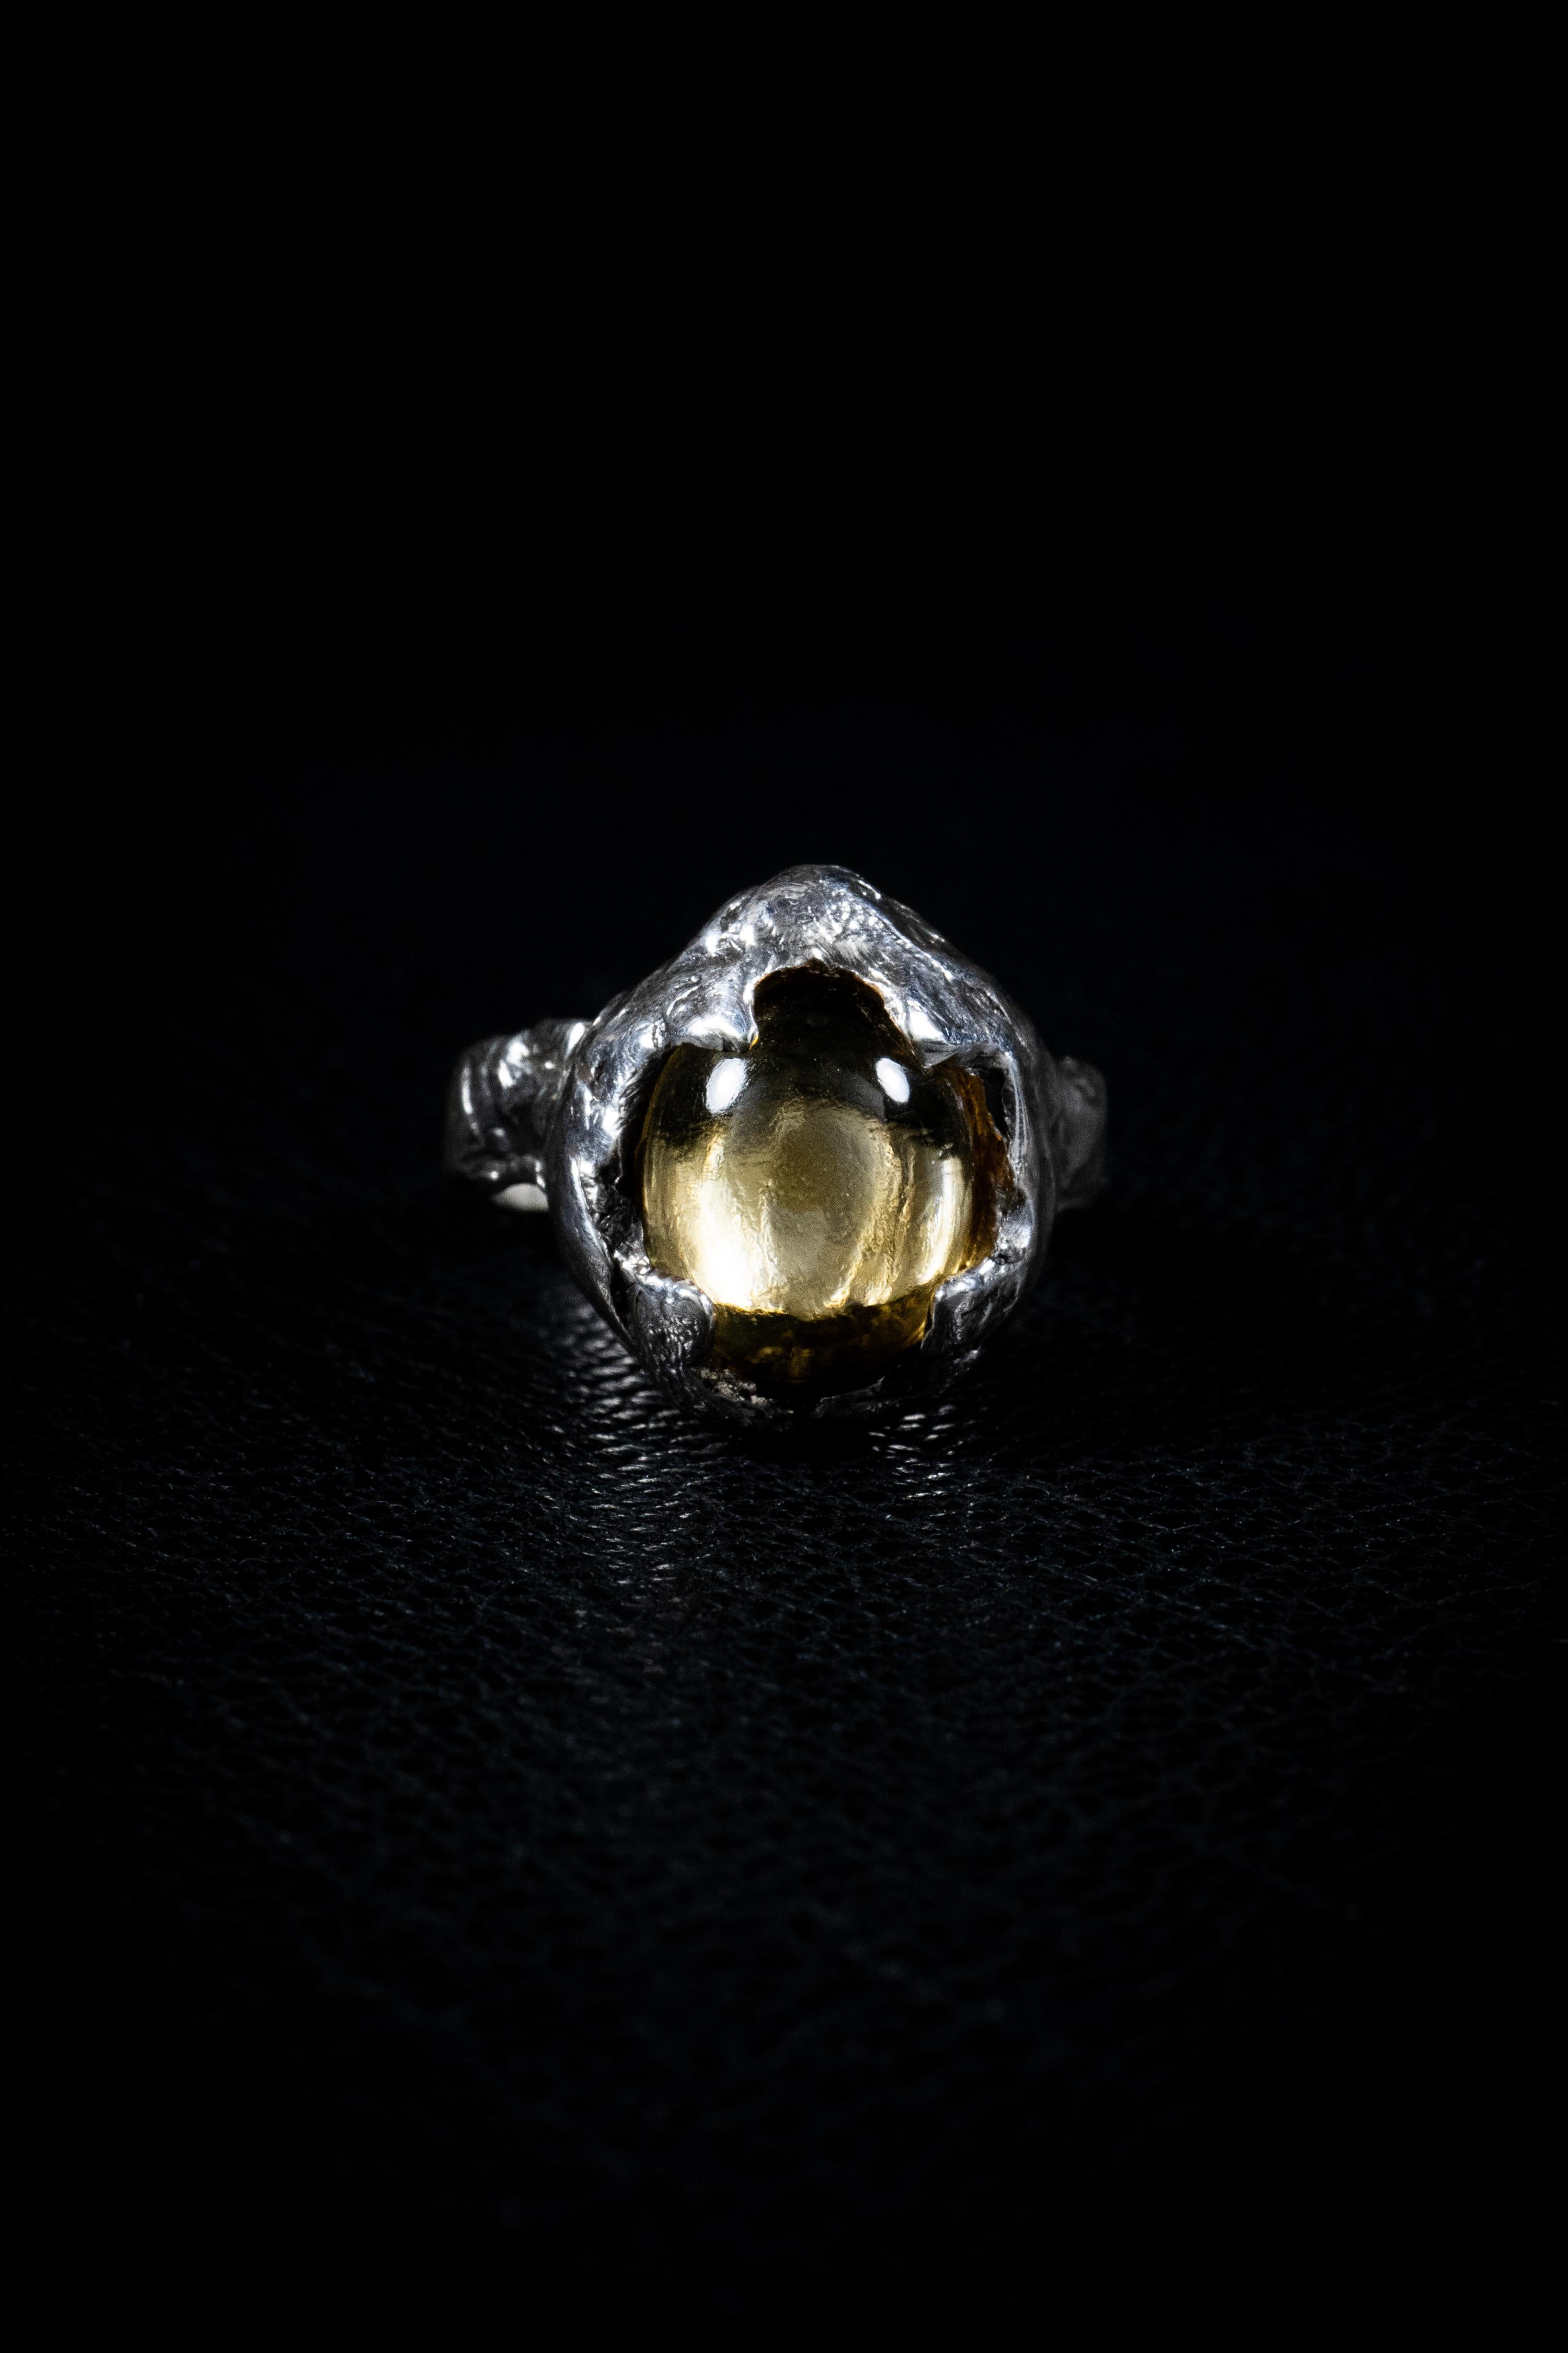 Lifecycle is a one-of-a-kind ring by Ken Fury that is hand-carved, cast in sterling silver, and features a natural citrine stone.

Ring Size: 7.5

Hand-signed